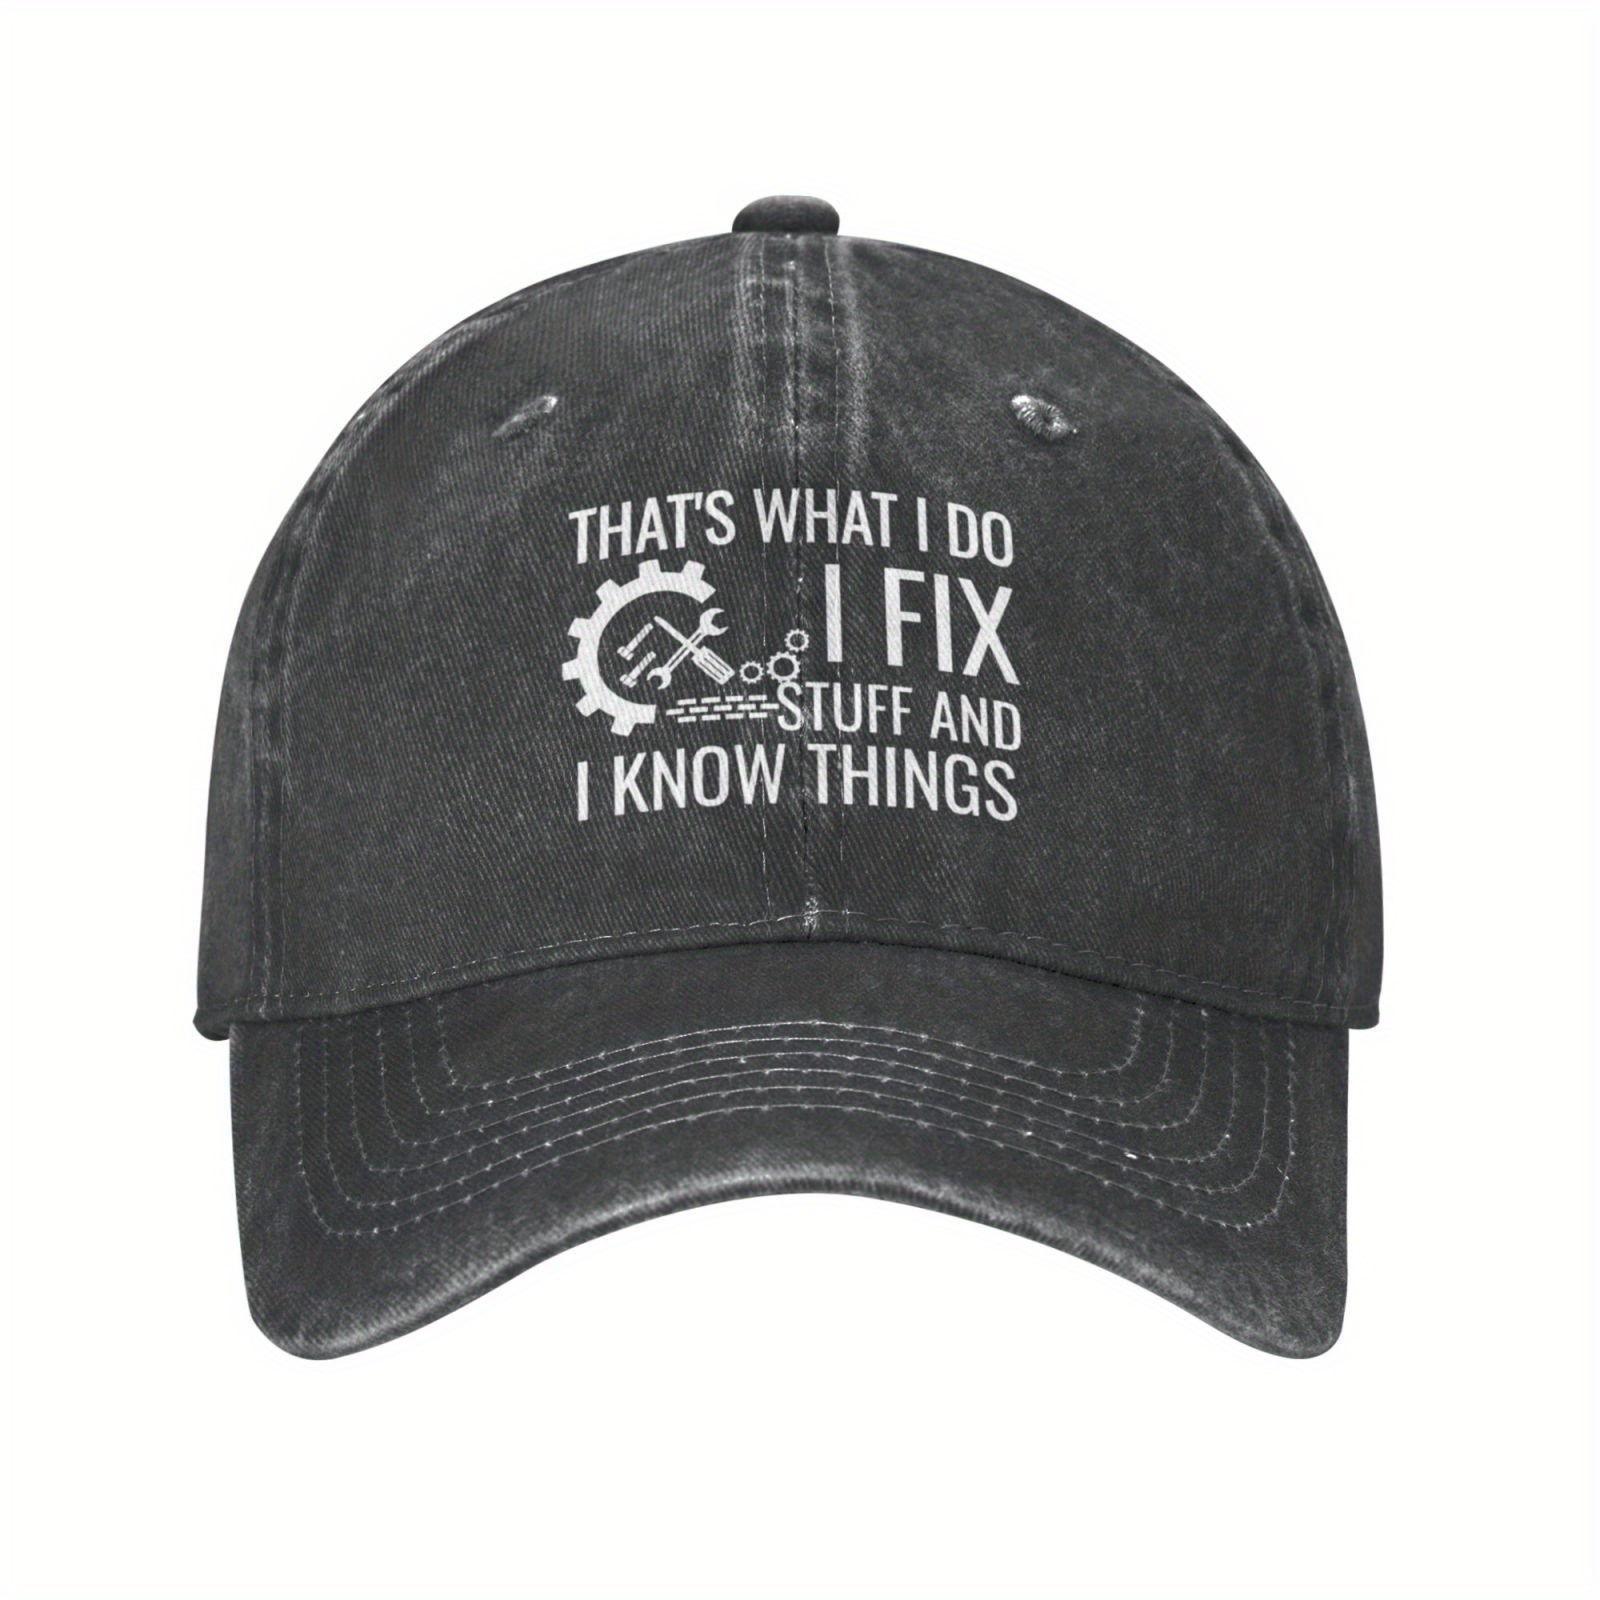 Dad Hat That's What I Do I FIX Stuff And I Know Things Baseball Cap,  Graphic Hat For Men And Women